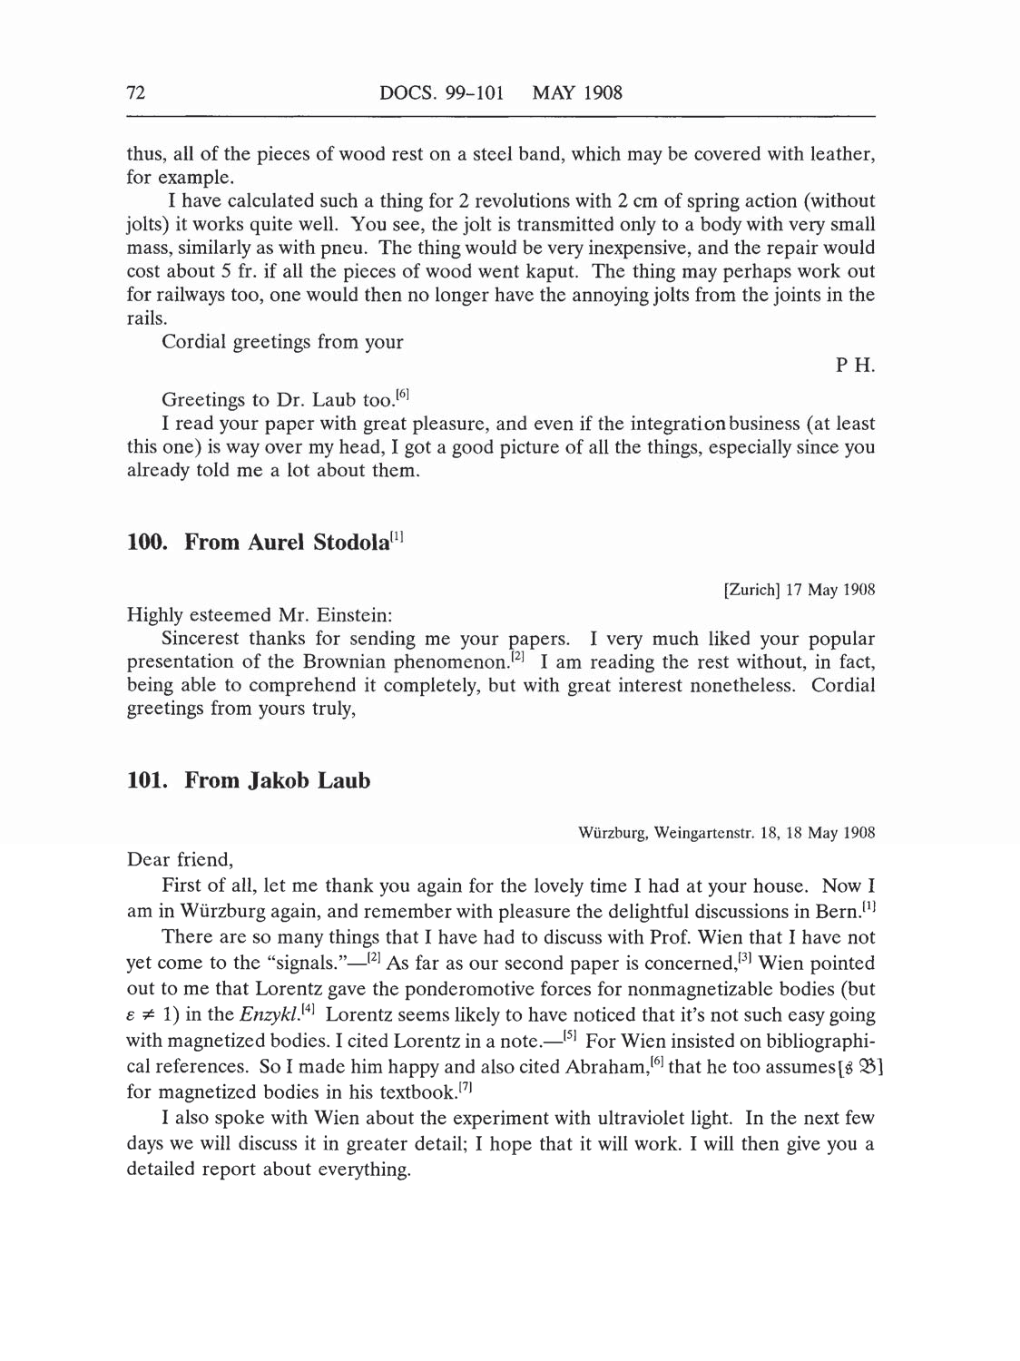 Volume 5: The Swiss Years: Correspondence, 1902-1914 (English translation supplement) page 72